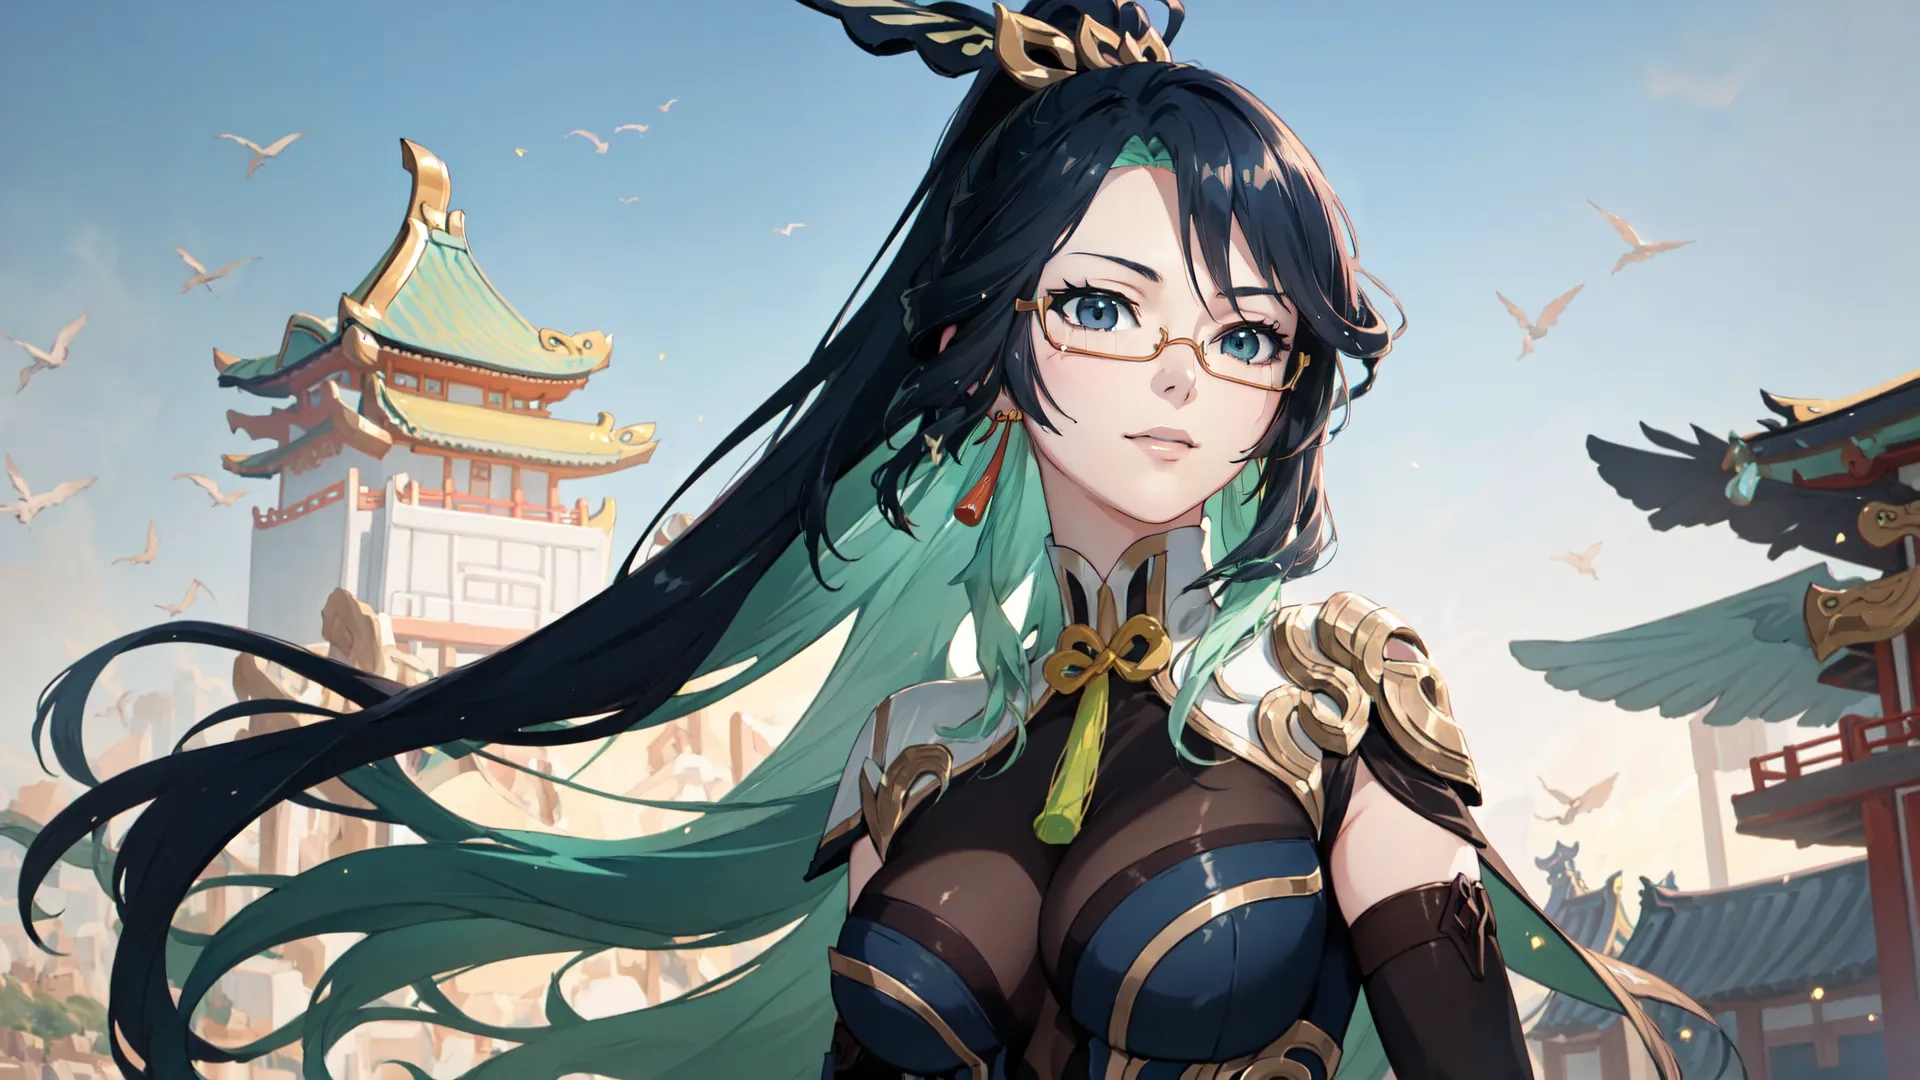 an anime avatar features a very attractive woman with long green hair and glasses on her face, surrounded by a pagoda background and birds flying overheads
